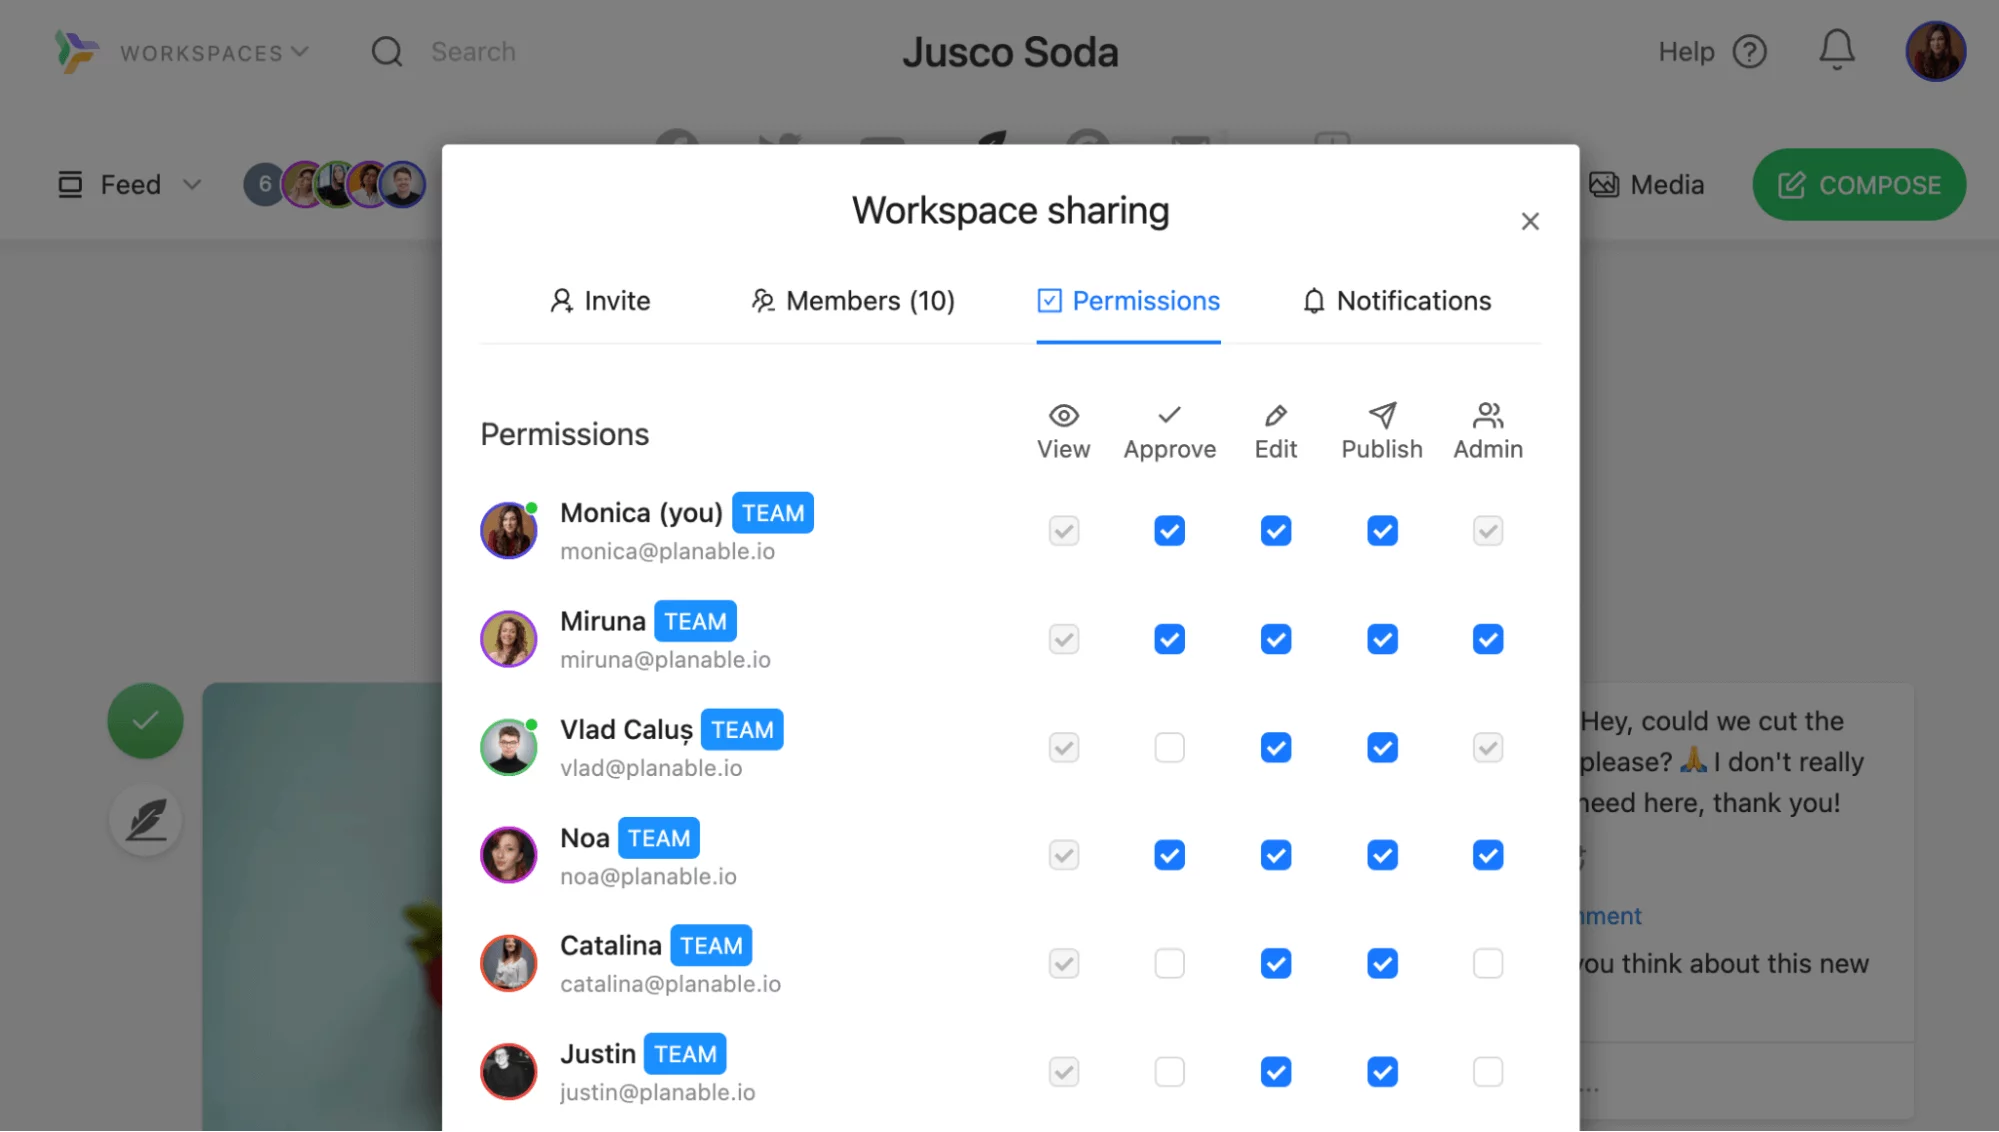 Planable screenshot showing multiple permissions for workspace sharing including view, approve, edit, publish and admin.